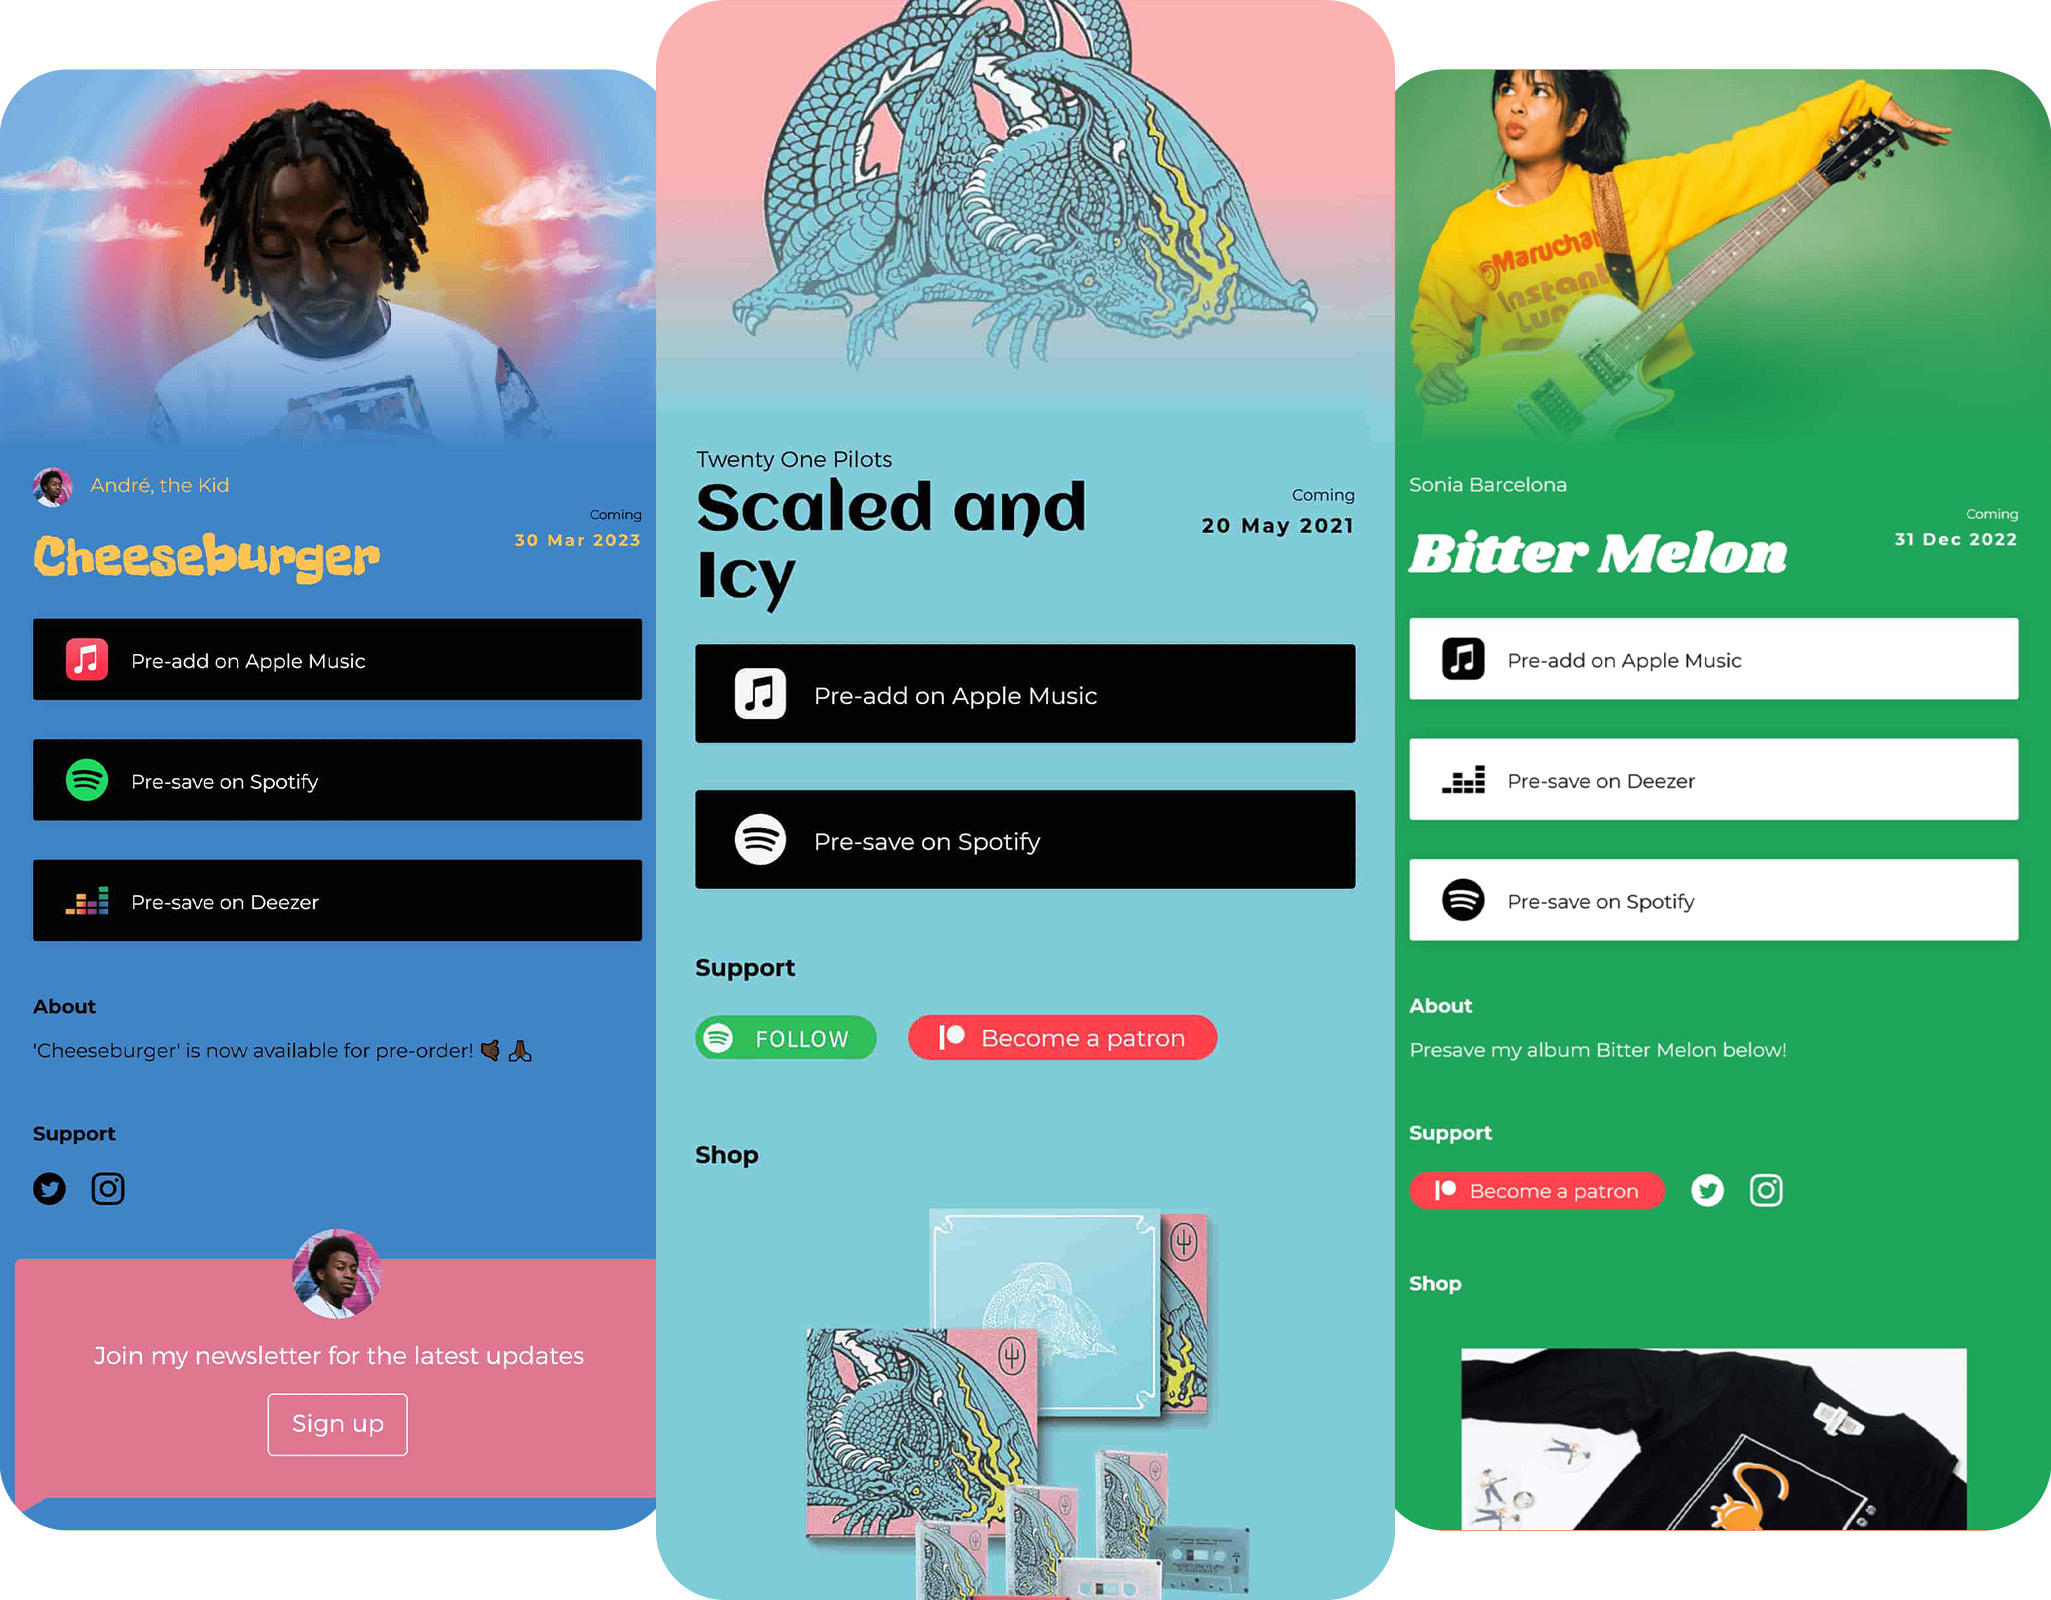 A screenshot displaying Spotify pre-save link landing pages. The image shows multiple web pages with vibrant visuals and text. 